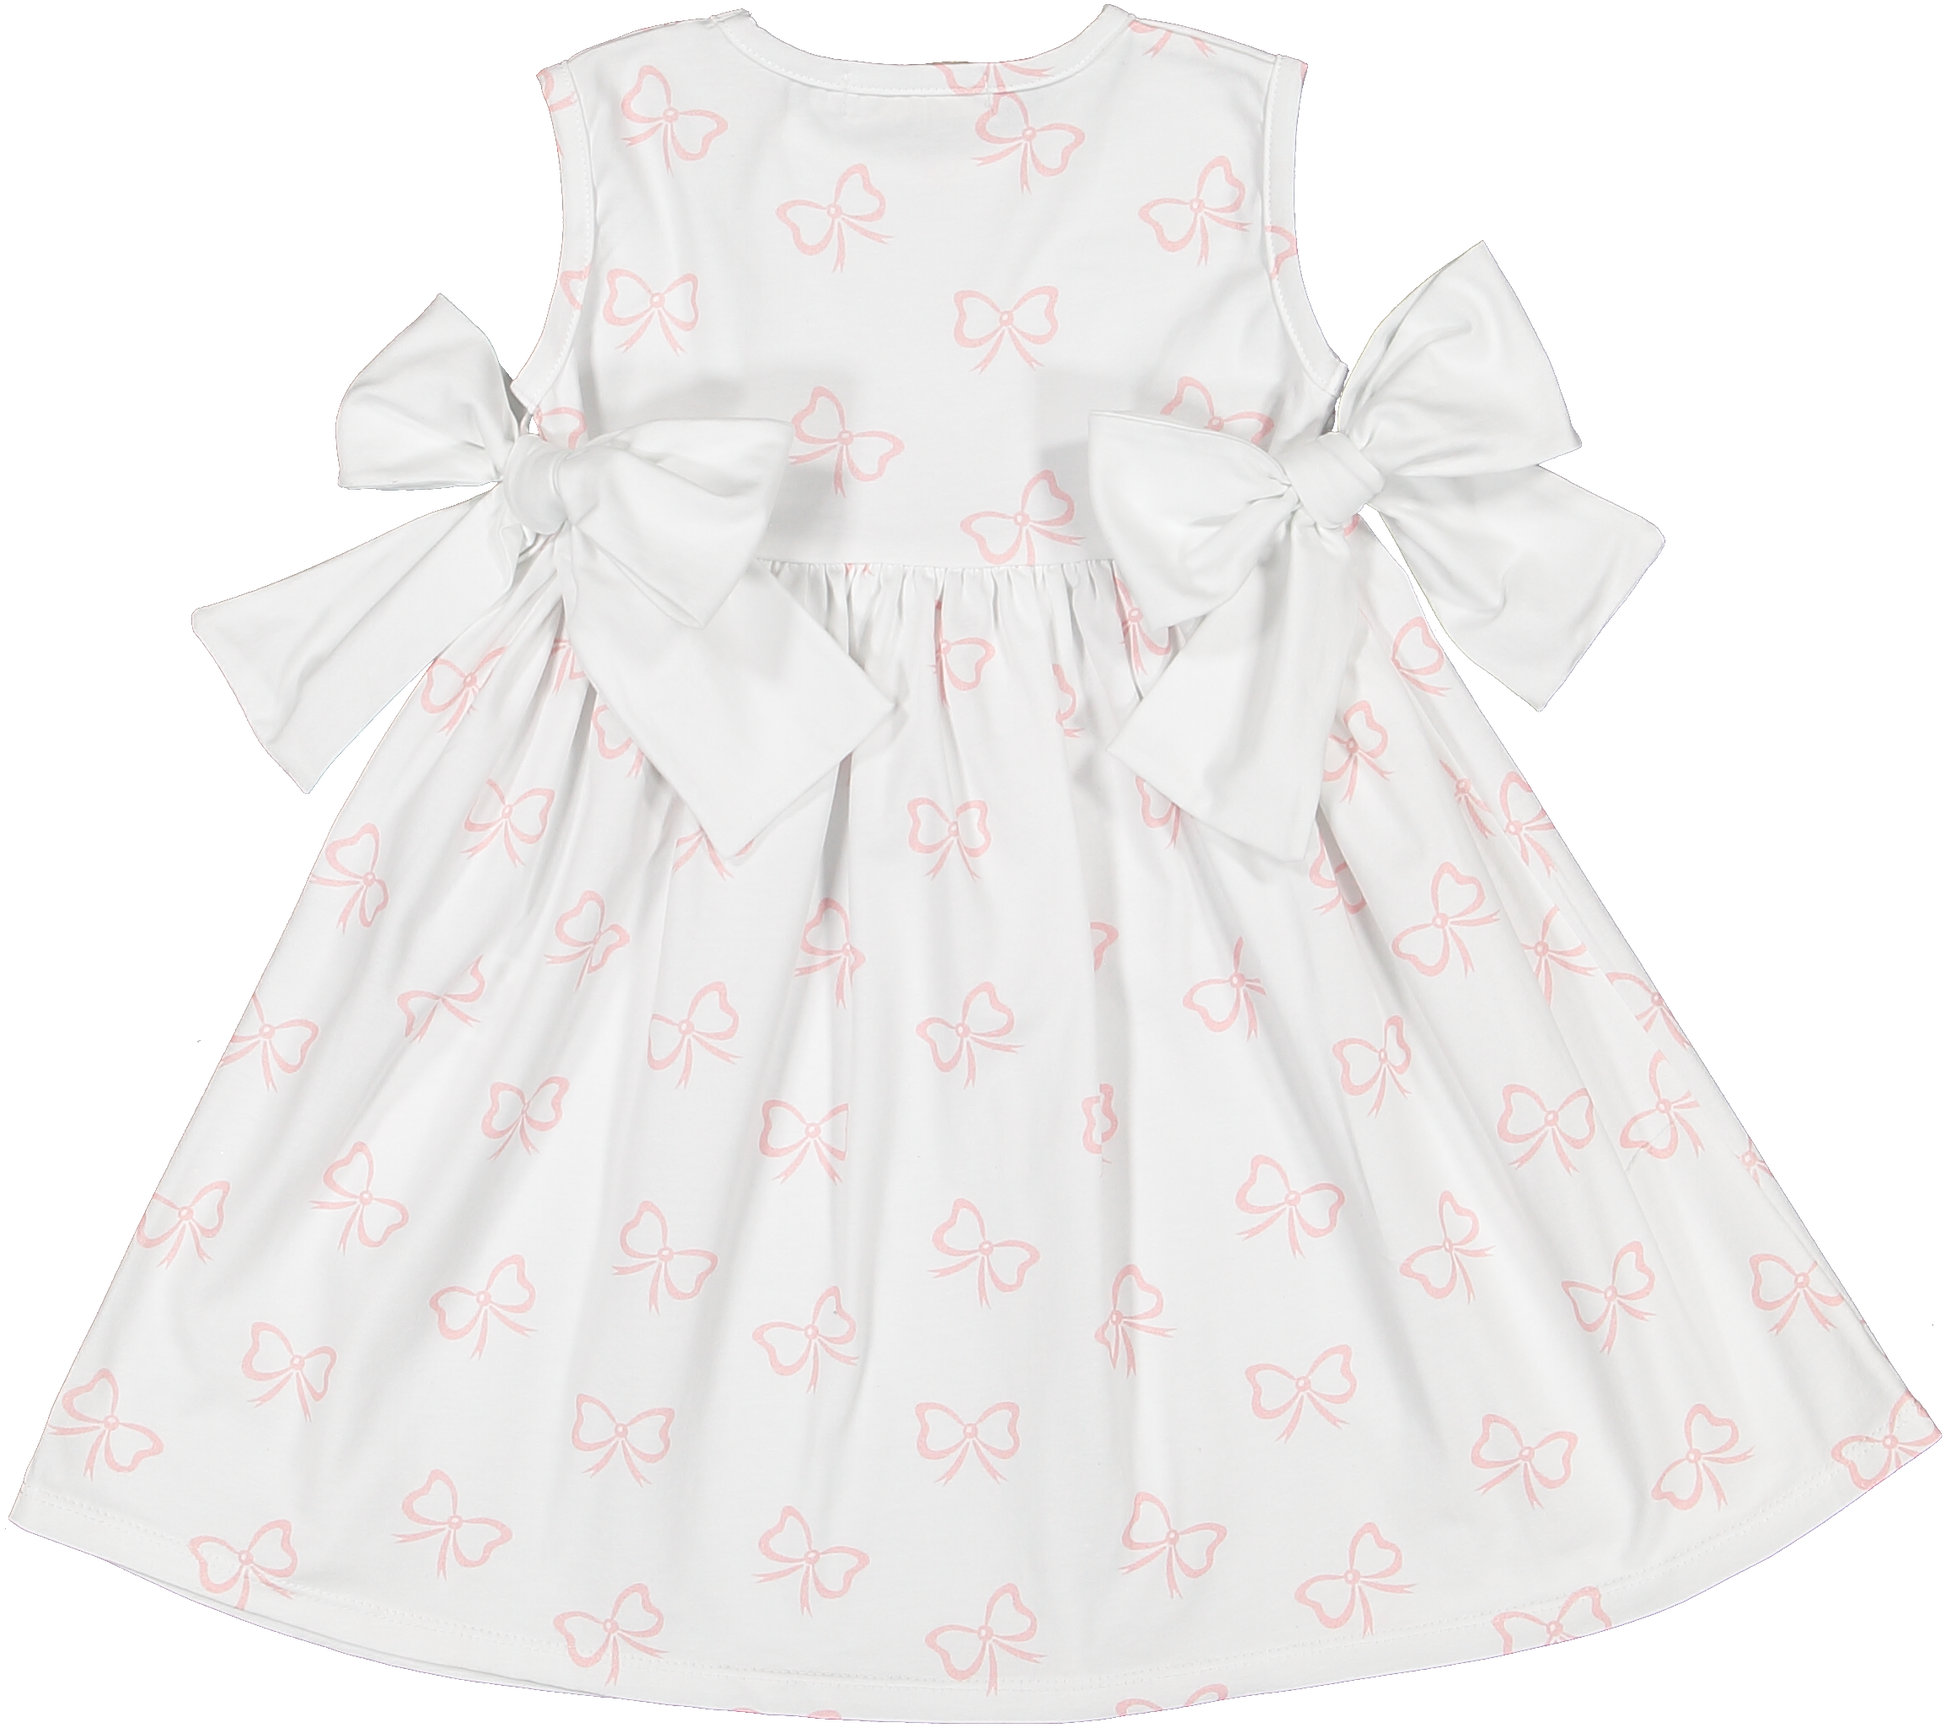 Sal and Pimenta Pink Bows A-Line Dress